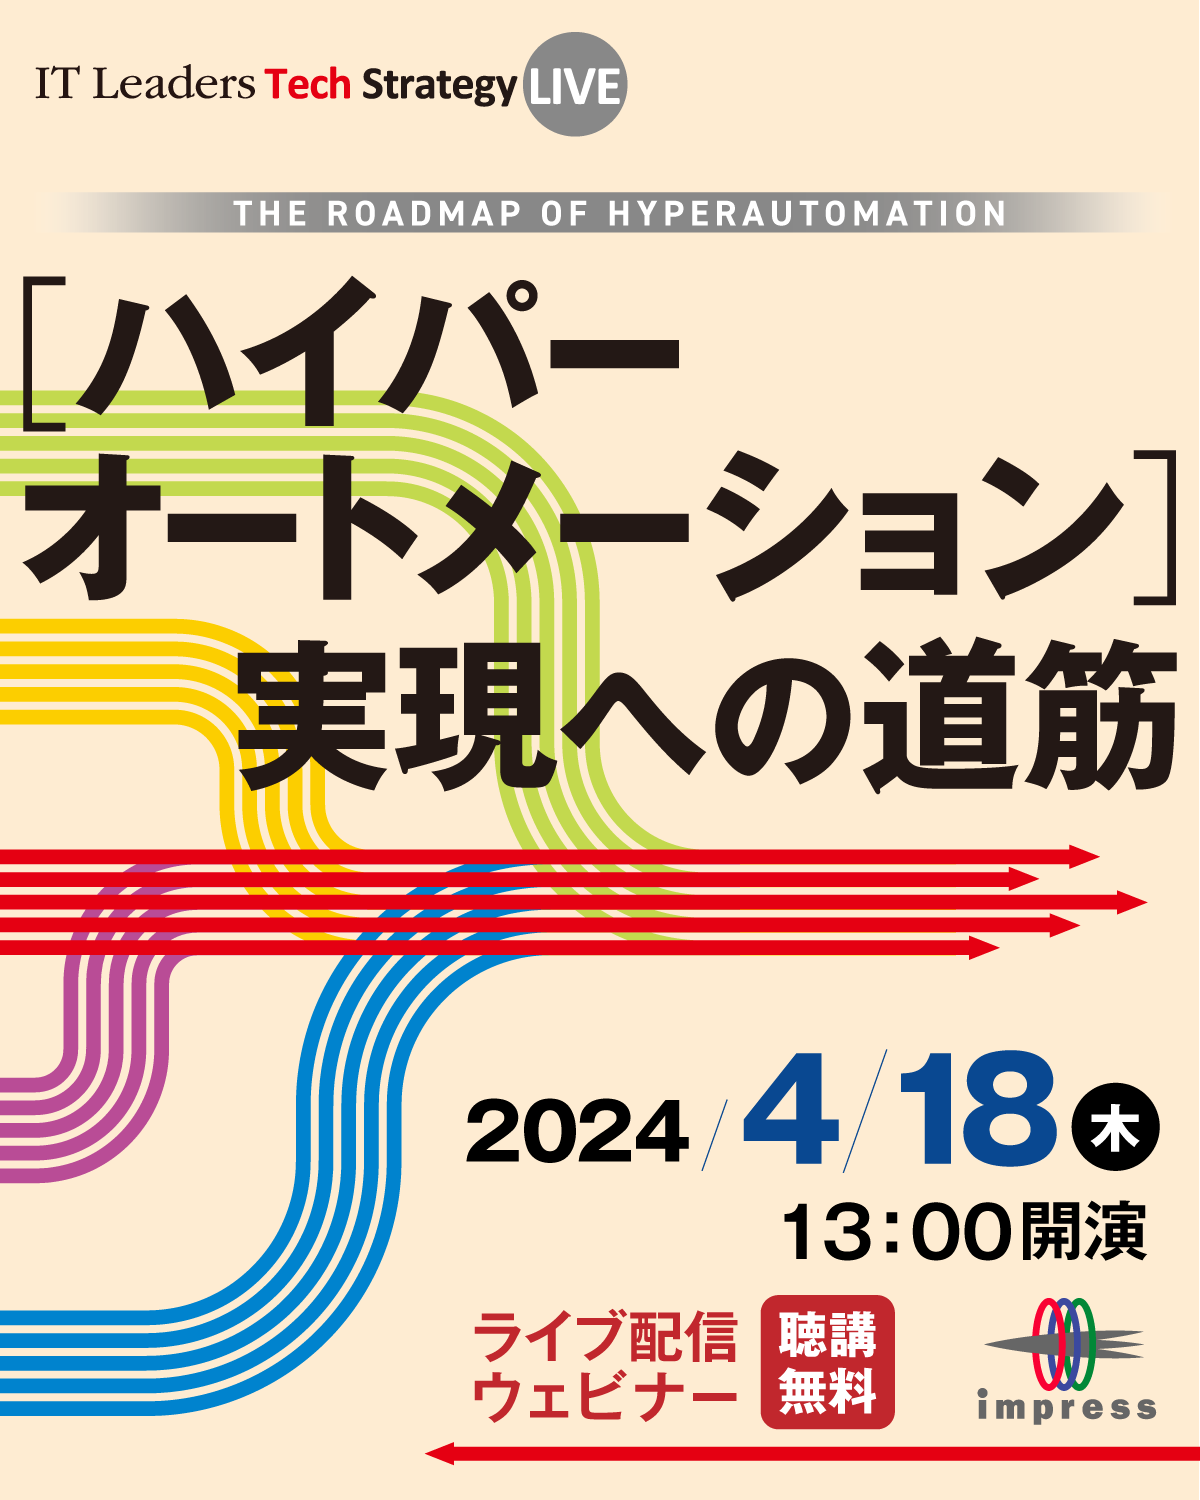 IT Leaders Tech Strategy LIVE [ハイパーオートメーション]実現への道筋 [2024年4月18日(木)]